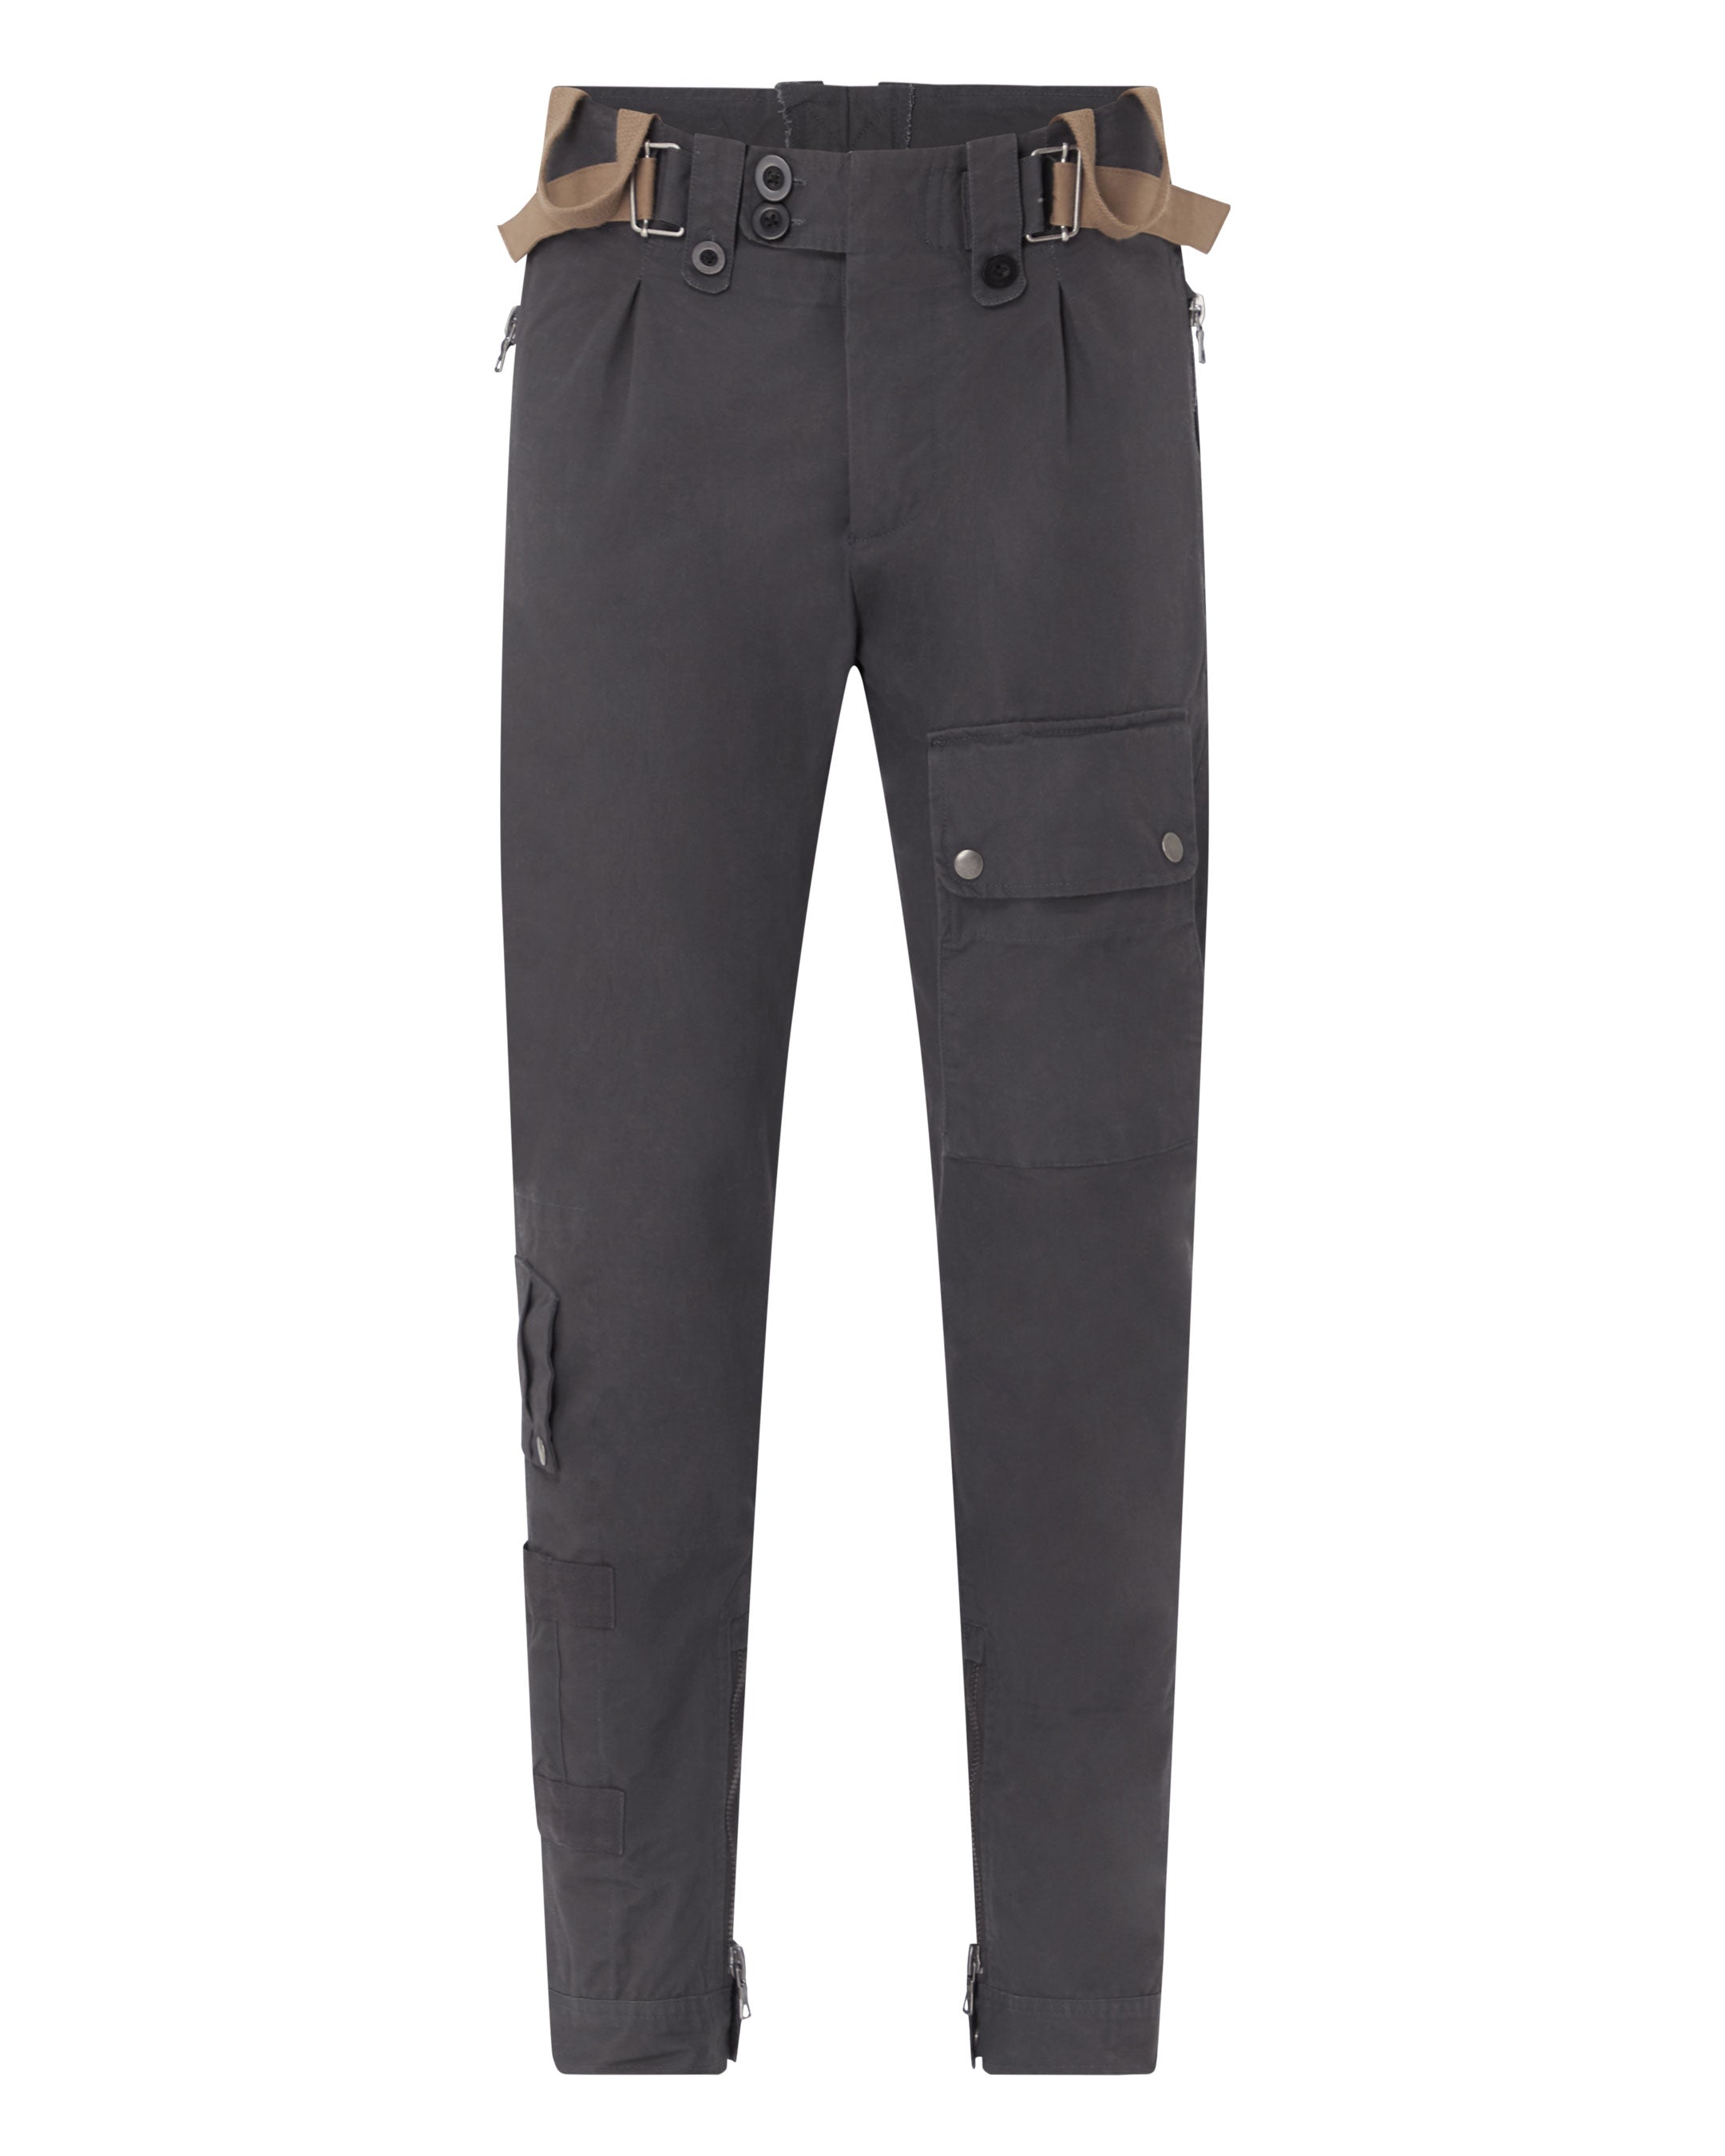 Versatile Cargo Trousers in Grey and Black